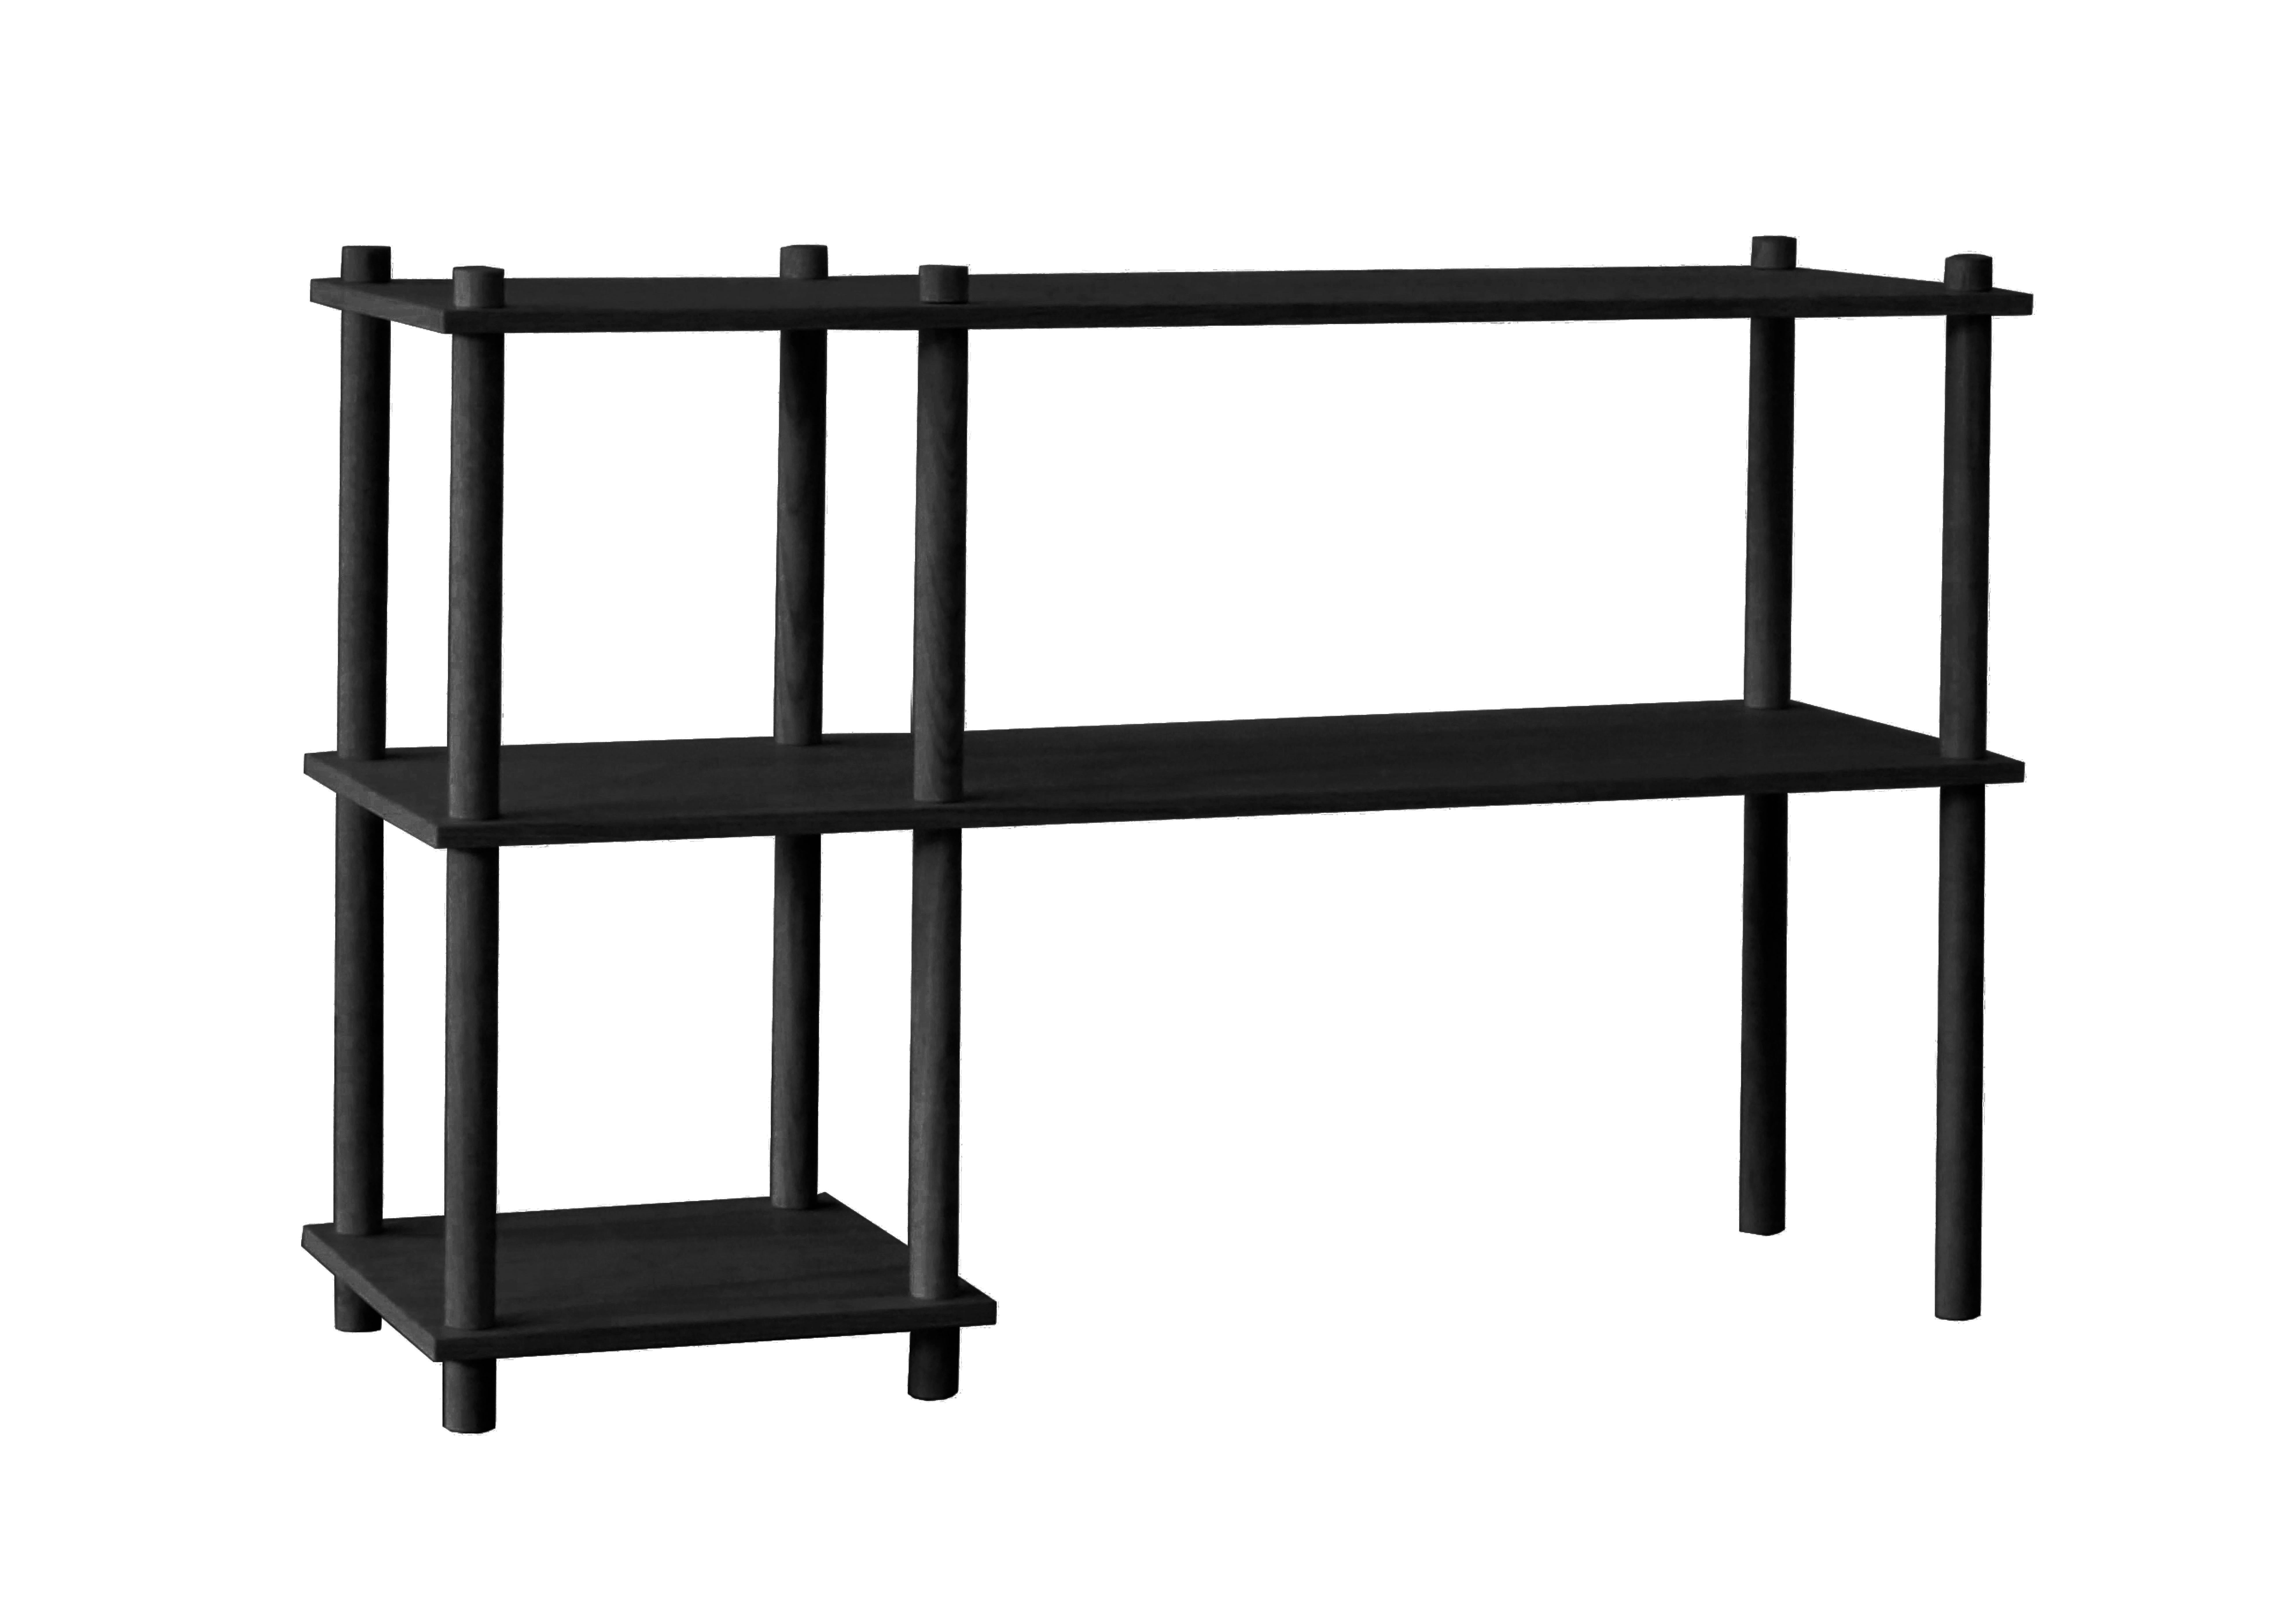 Black oak elevate shelving II by Camilla Akersveen and Christopher Konings
Materials: metal, oak.
Dimensions: D 40 x W 120 x H 78.7 cm
Available in matt lacquered oak or black oak. Different shelving systems available.

Camilla Akersveen and